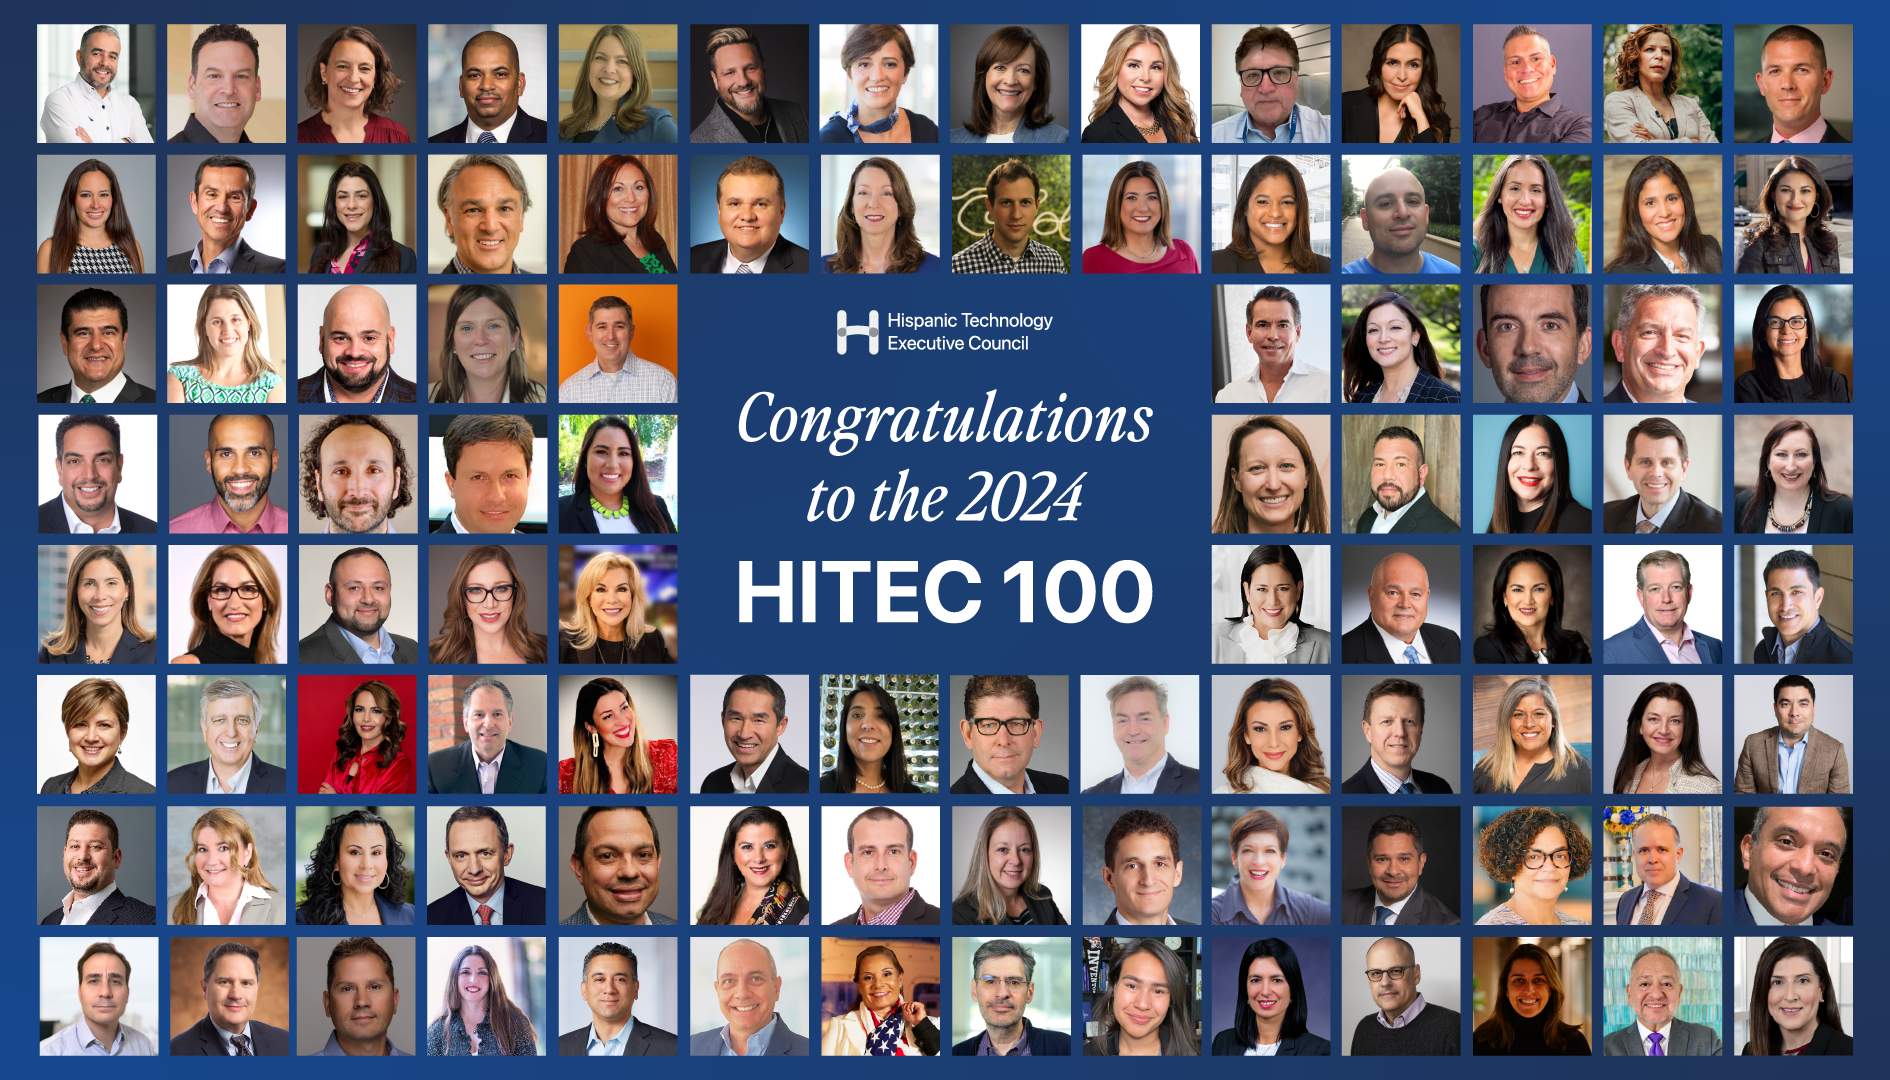 The HITEC 100: Celebrating the 100 Most Influential Hispanic Leaders in Technology